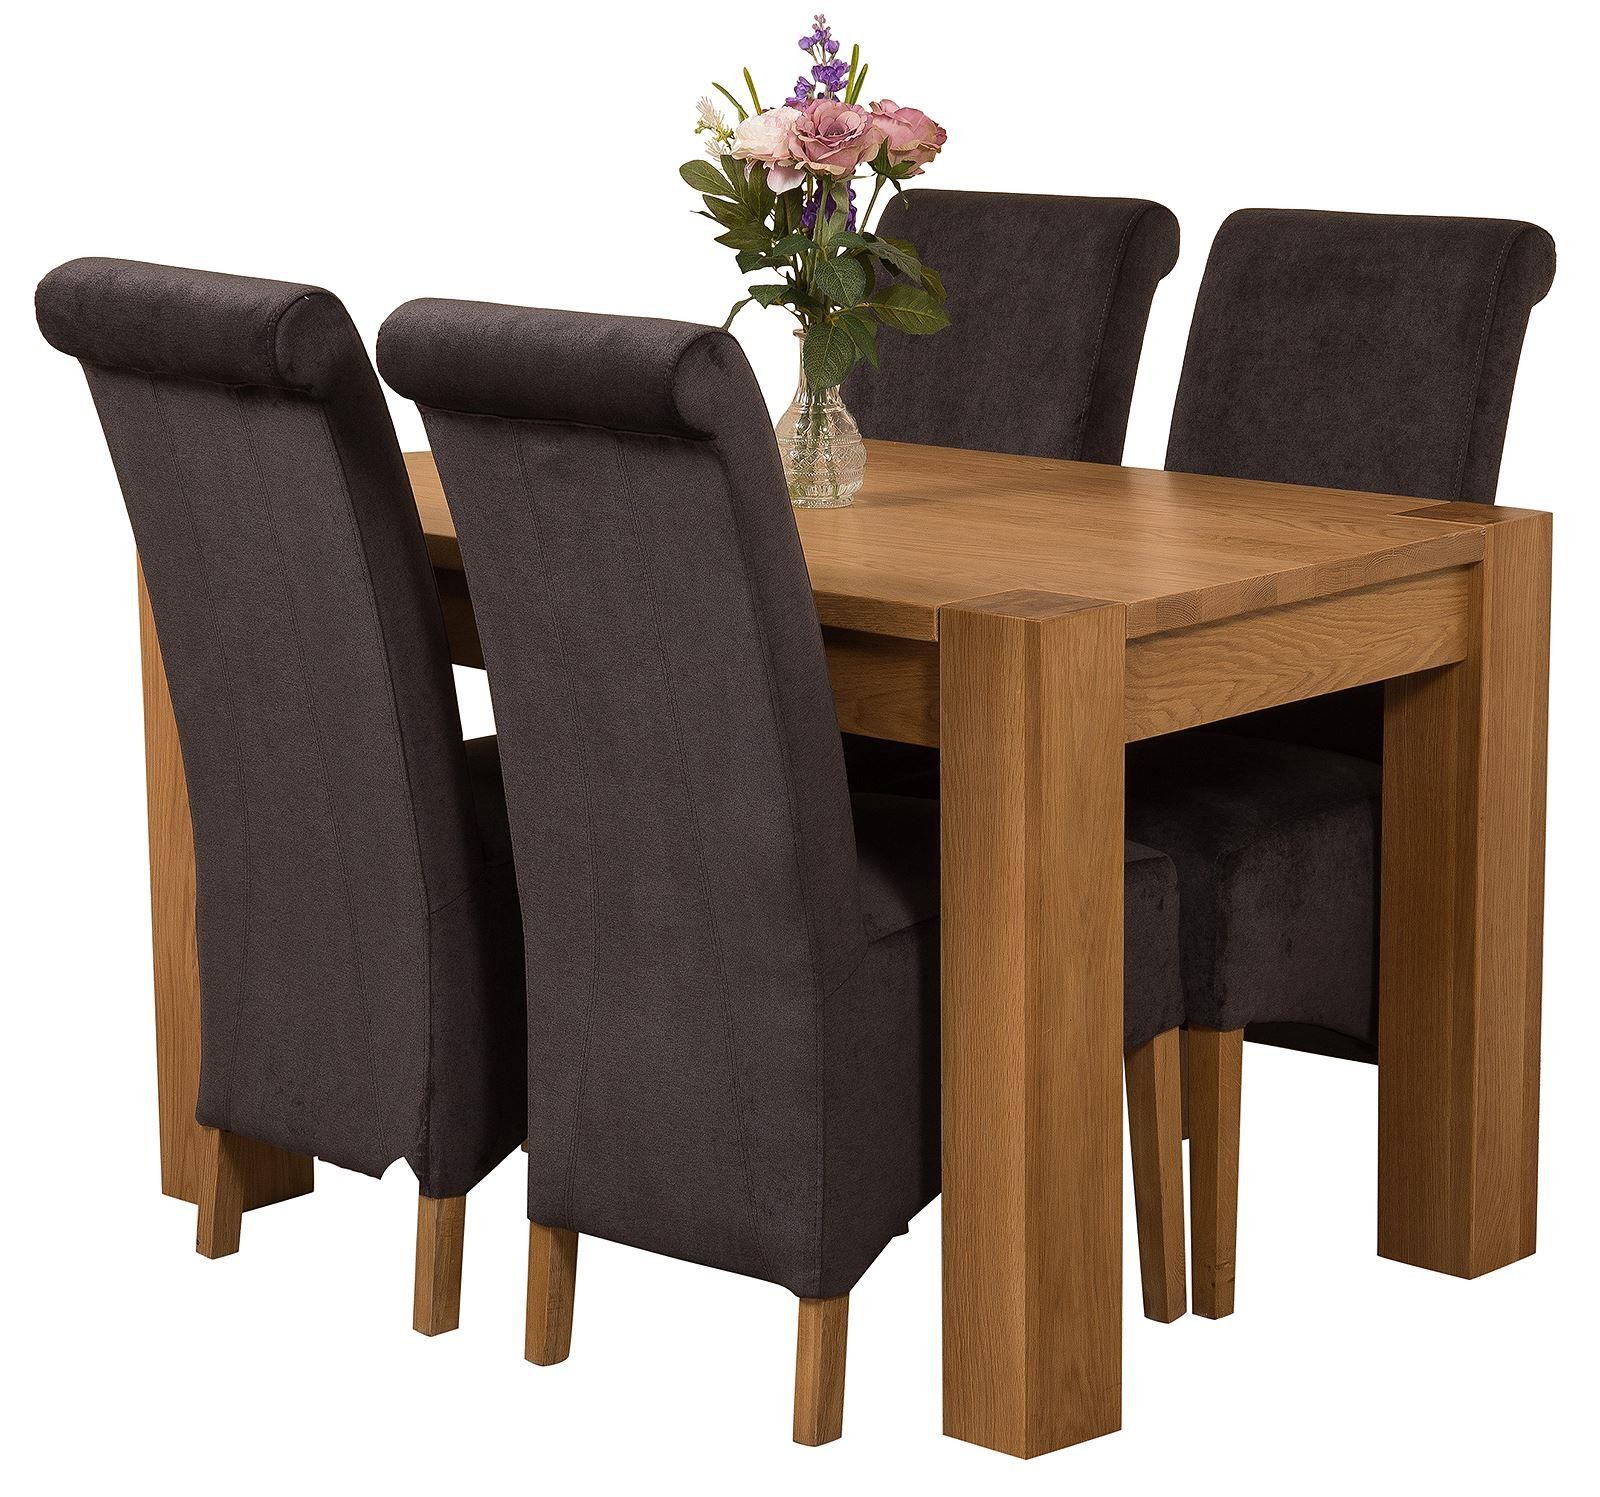 Kuba Solid Oak 125cm Dining Table with 4 Montana Dining Chairs [Black Fabric]